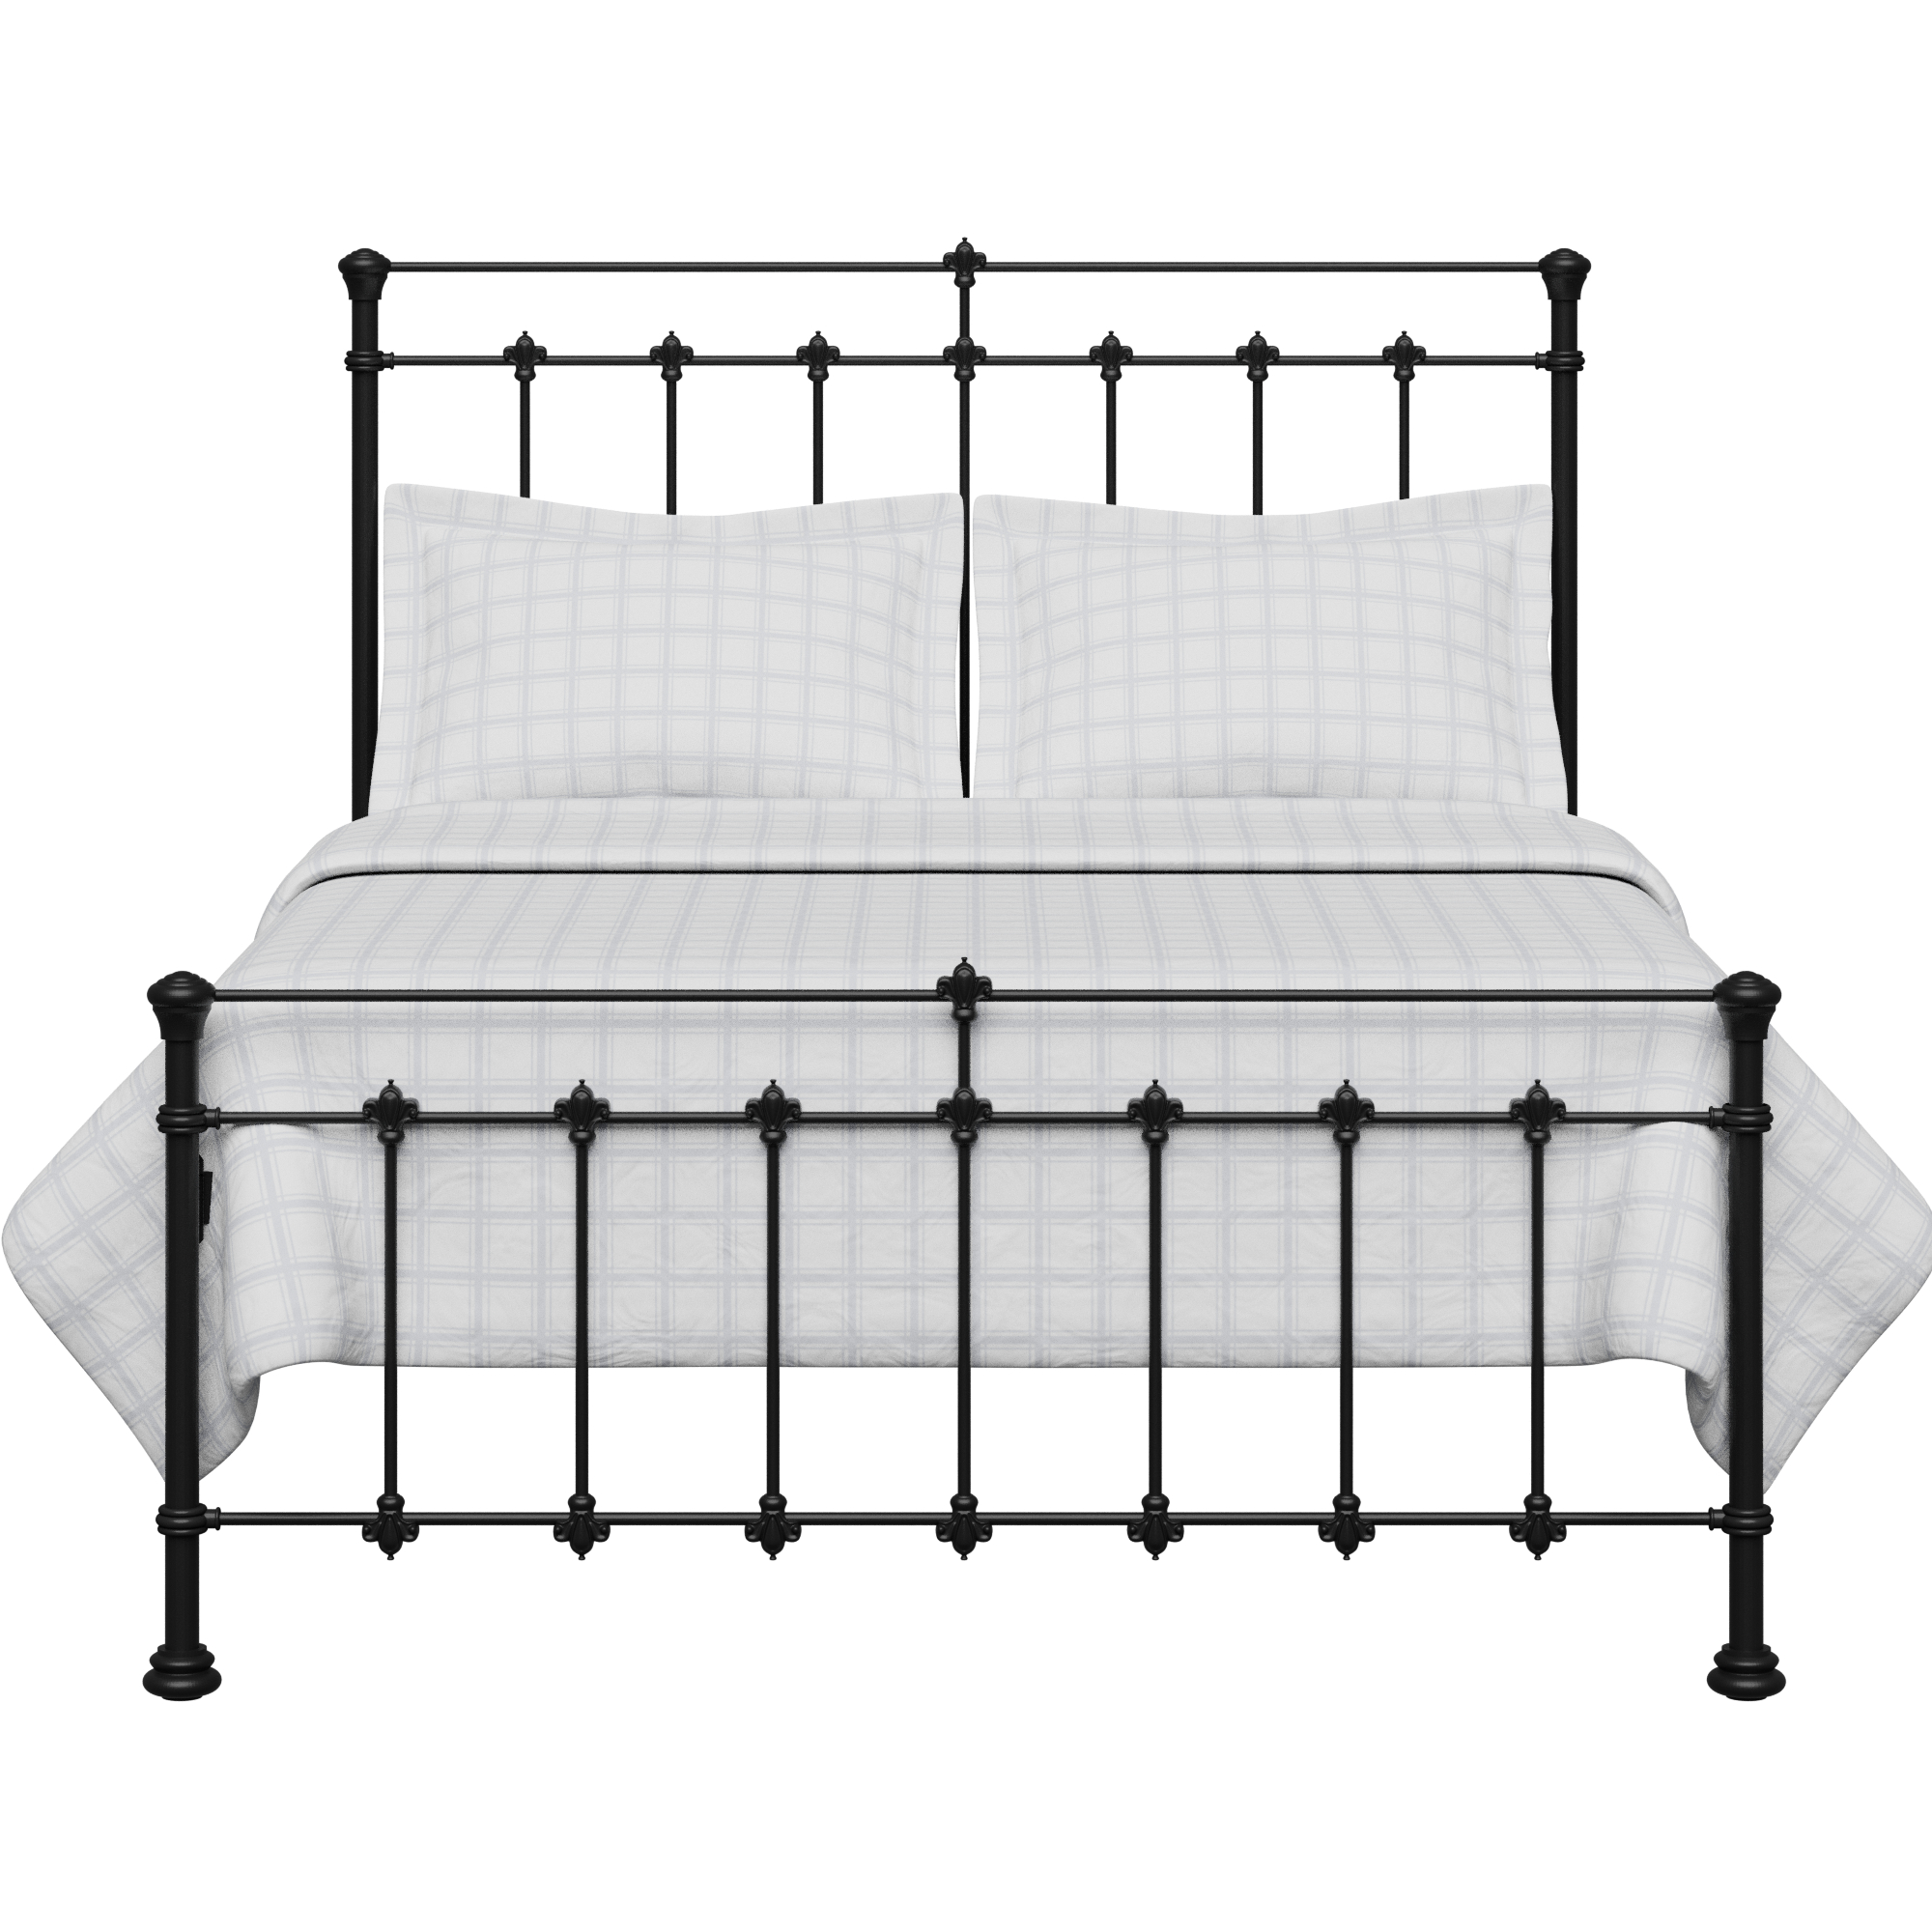 Edwardian Iron Metal Bed Frame The, What Kind Of Metal Are Bed Frames Made Of